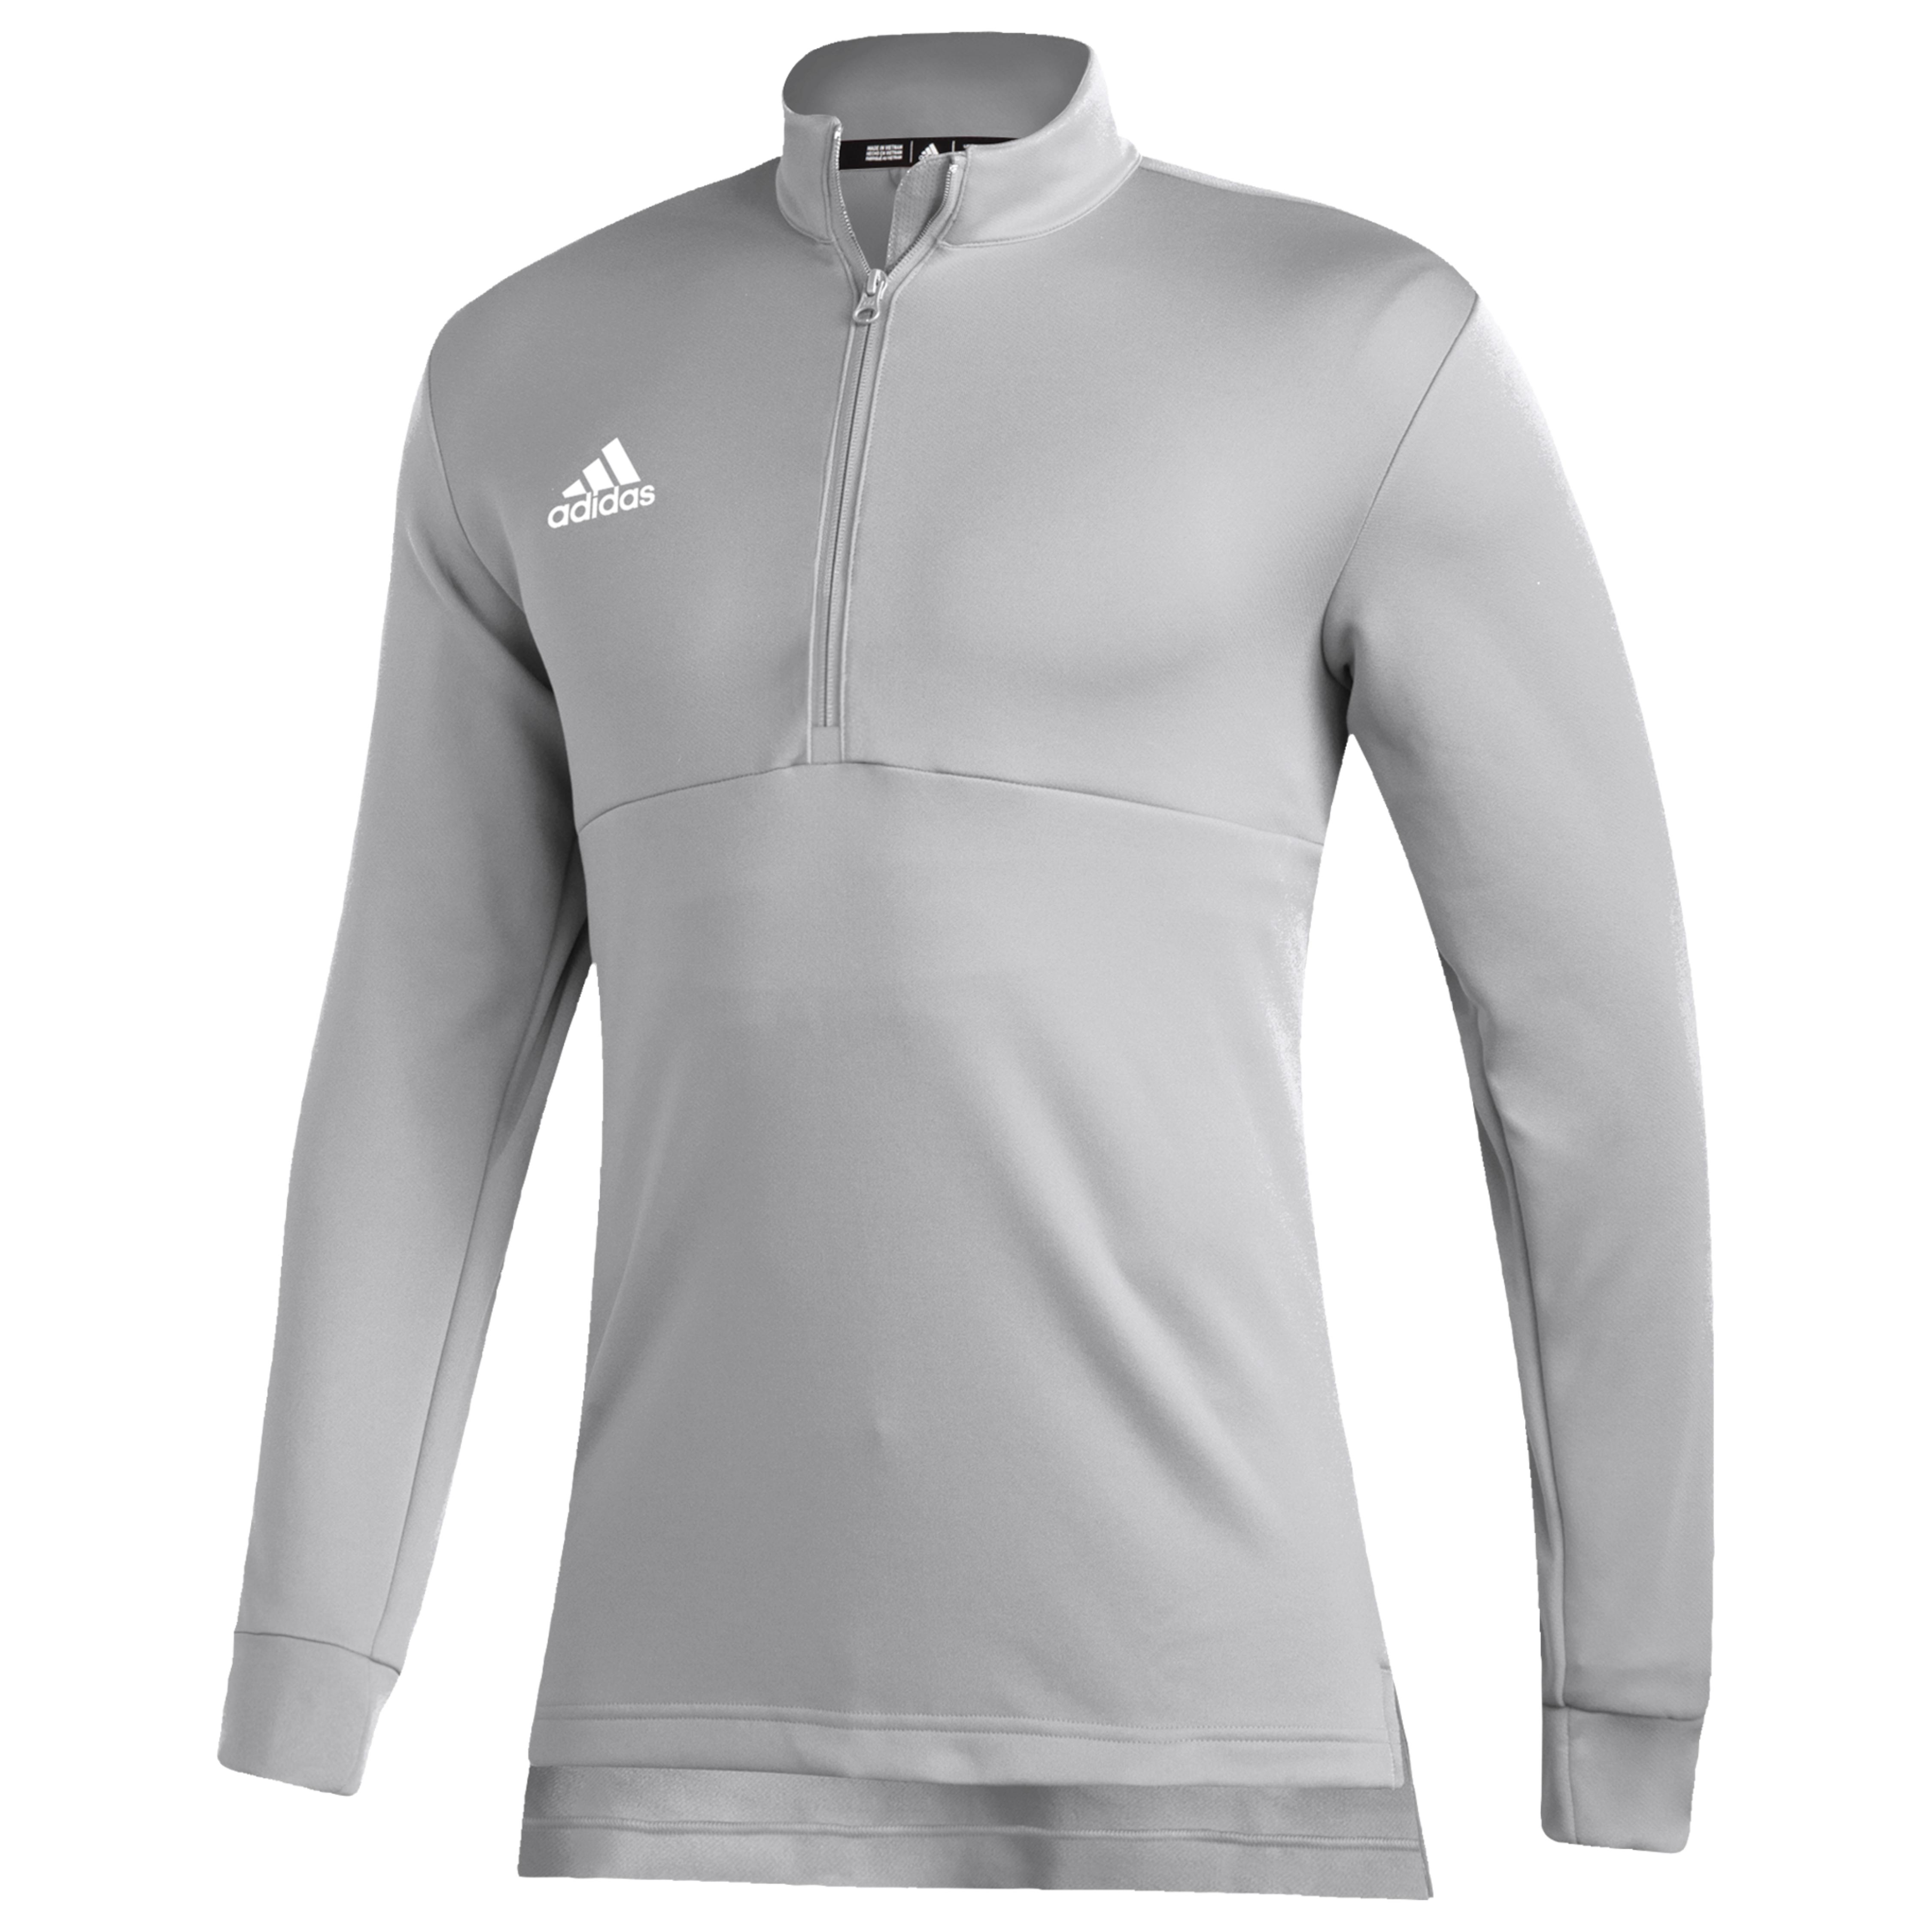 adidas Synthetic Team Issue 1/4 Zip in Grey Two/White (Gray) for Men - Lyst